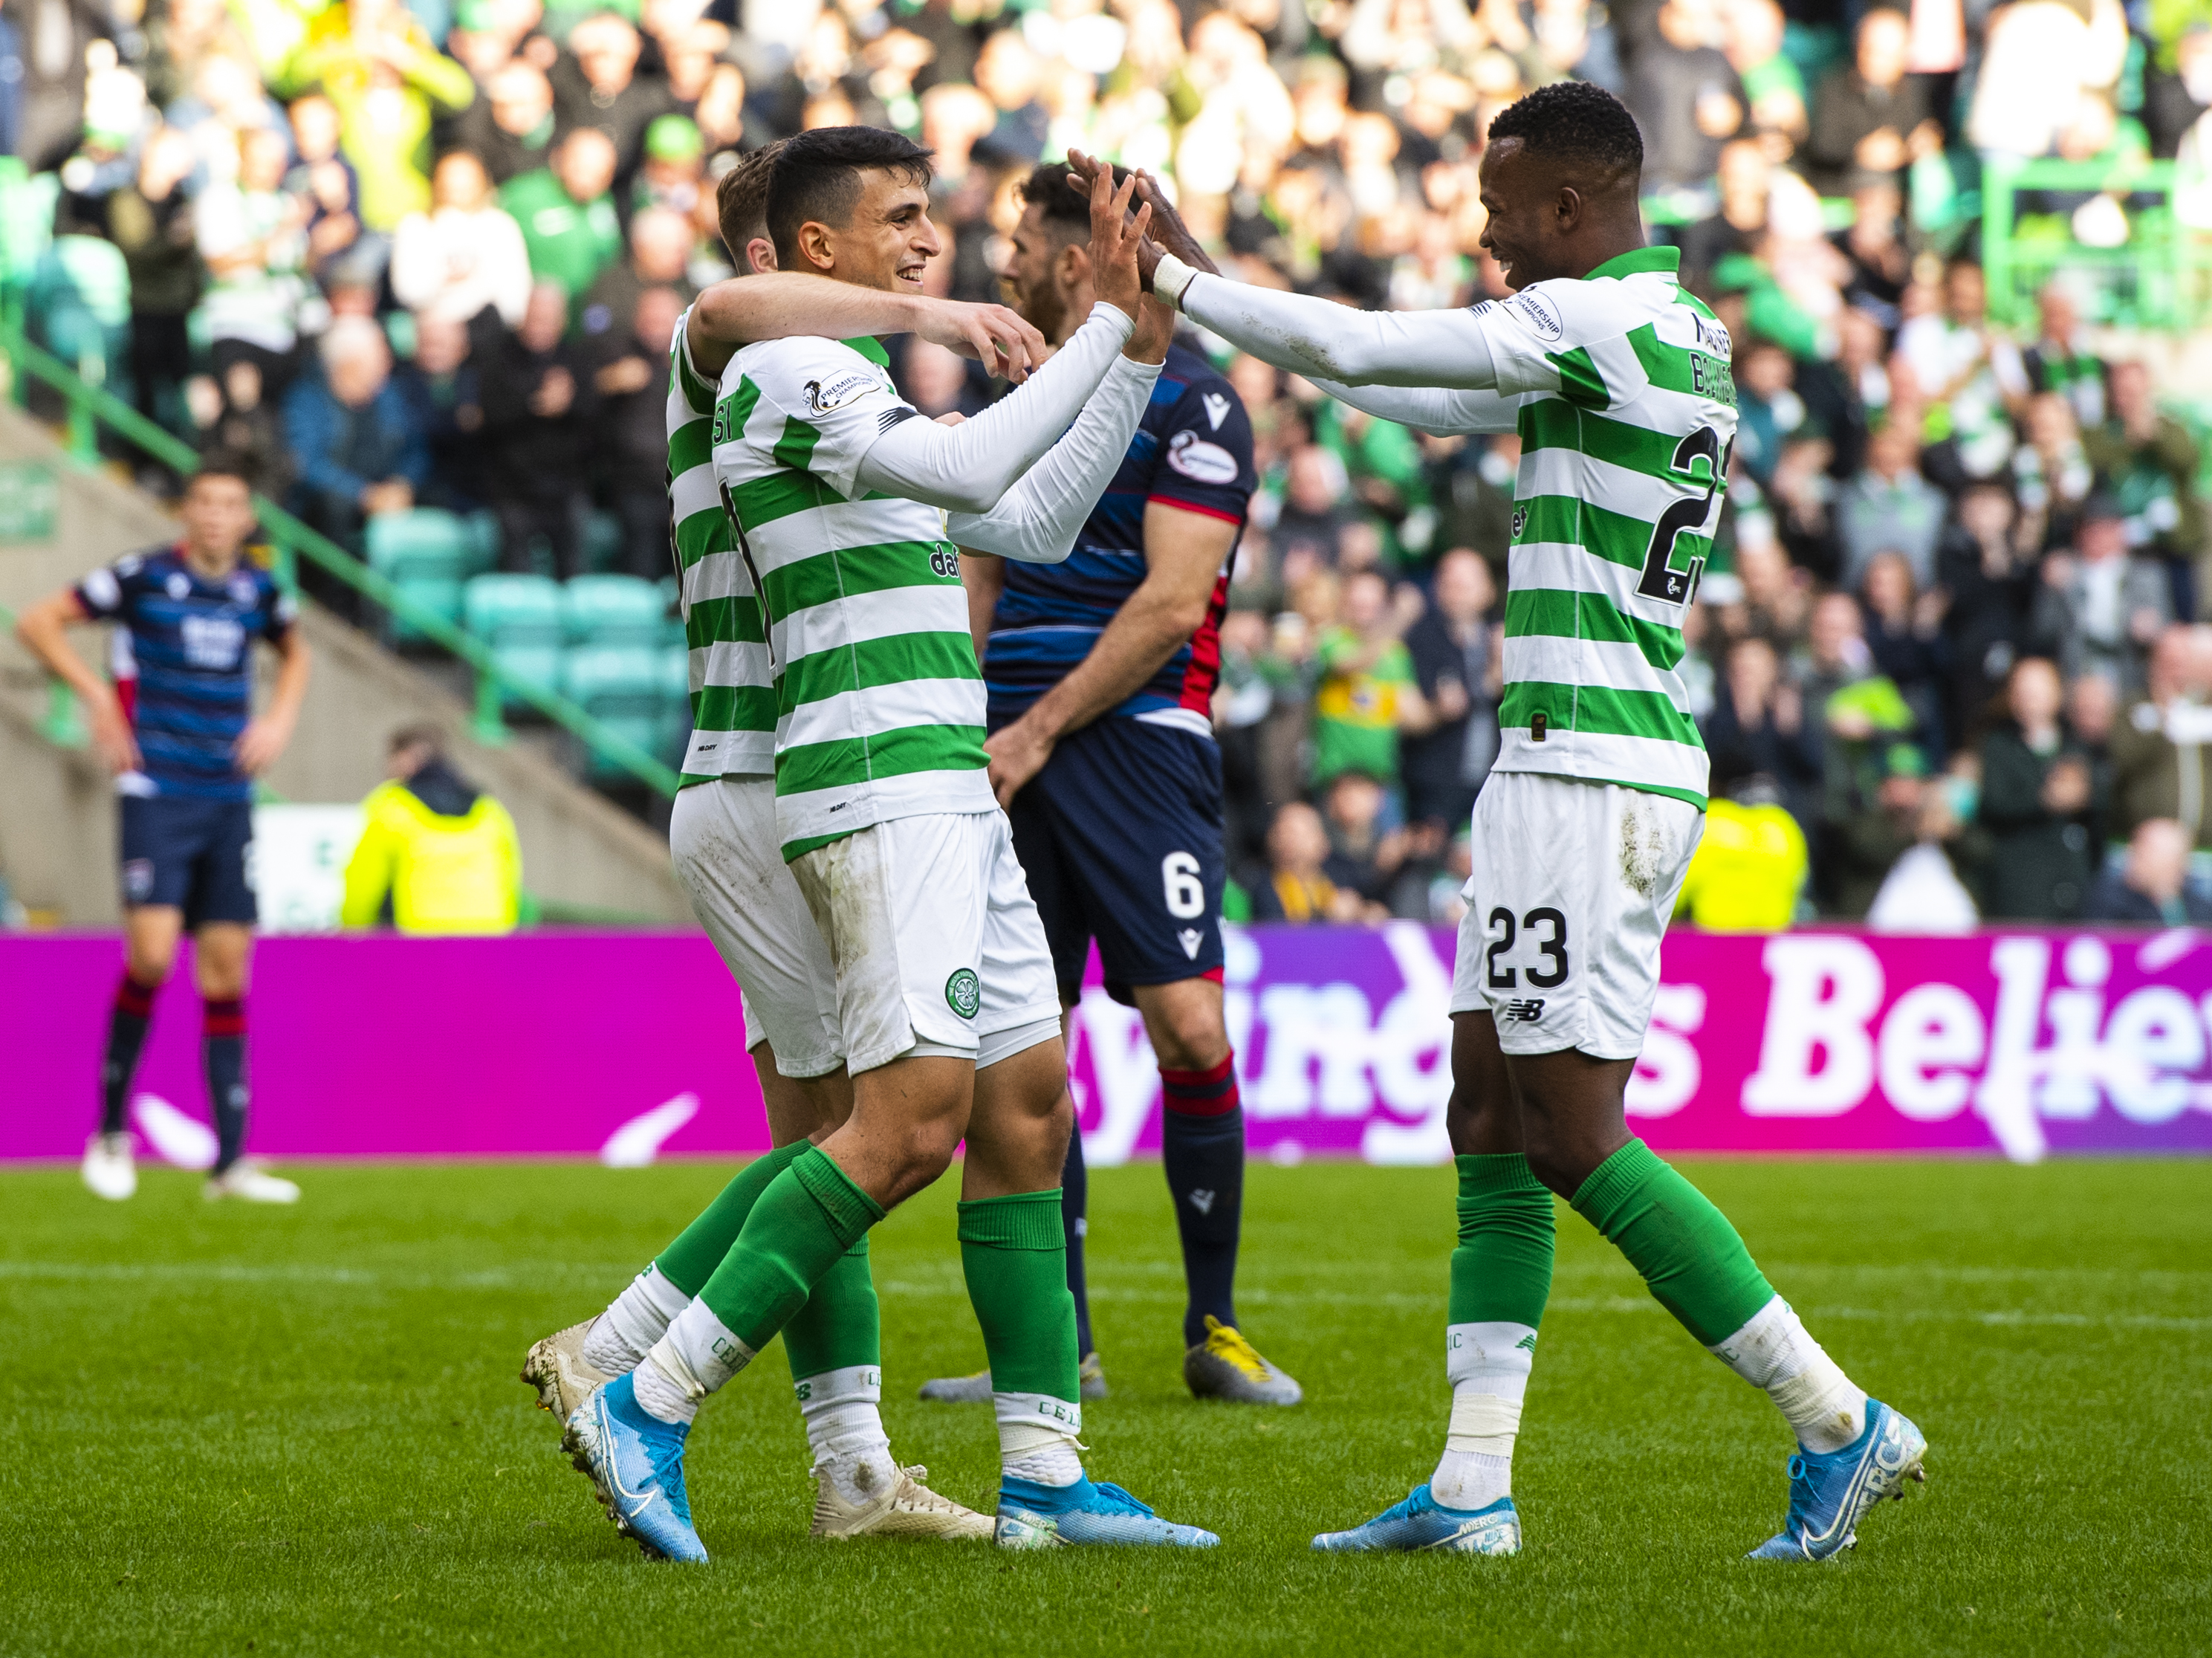 Celtic's Mohammed Elyounoussi celebrates with Boli Bolignoli after scoring to make it 6-0